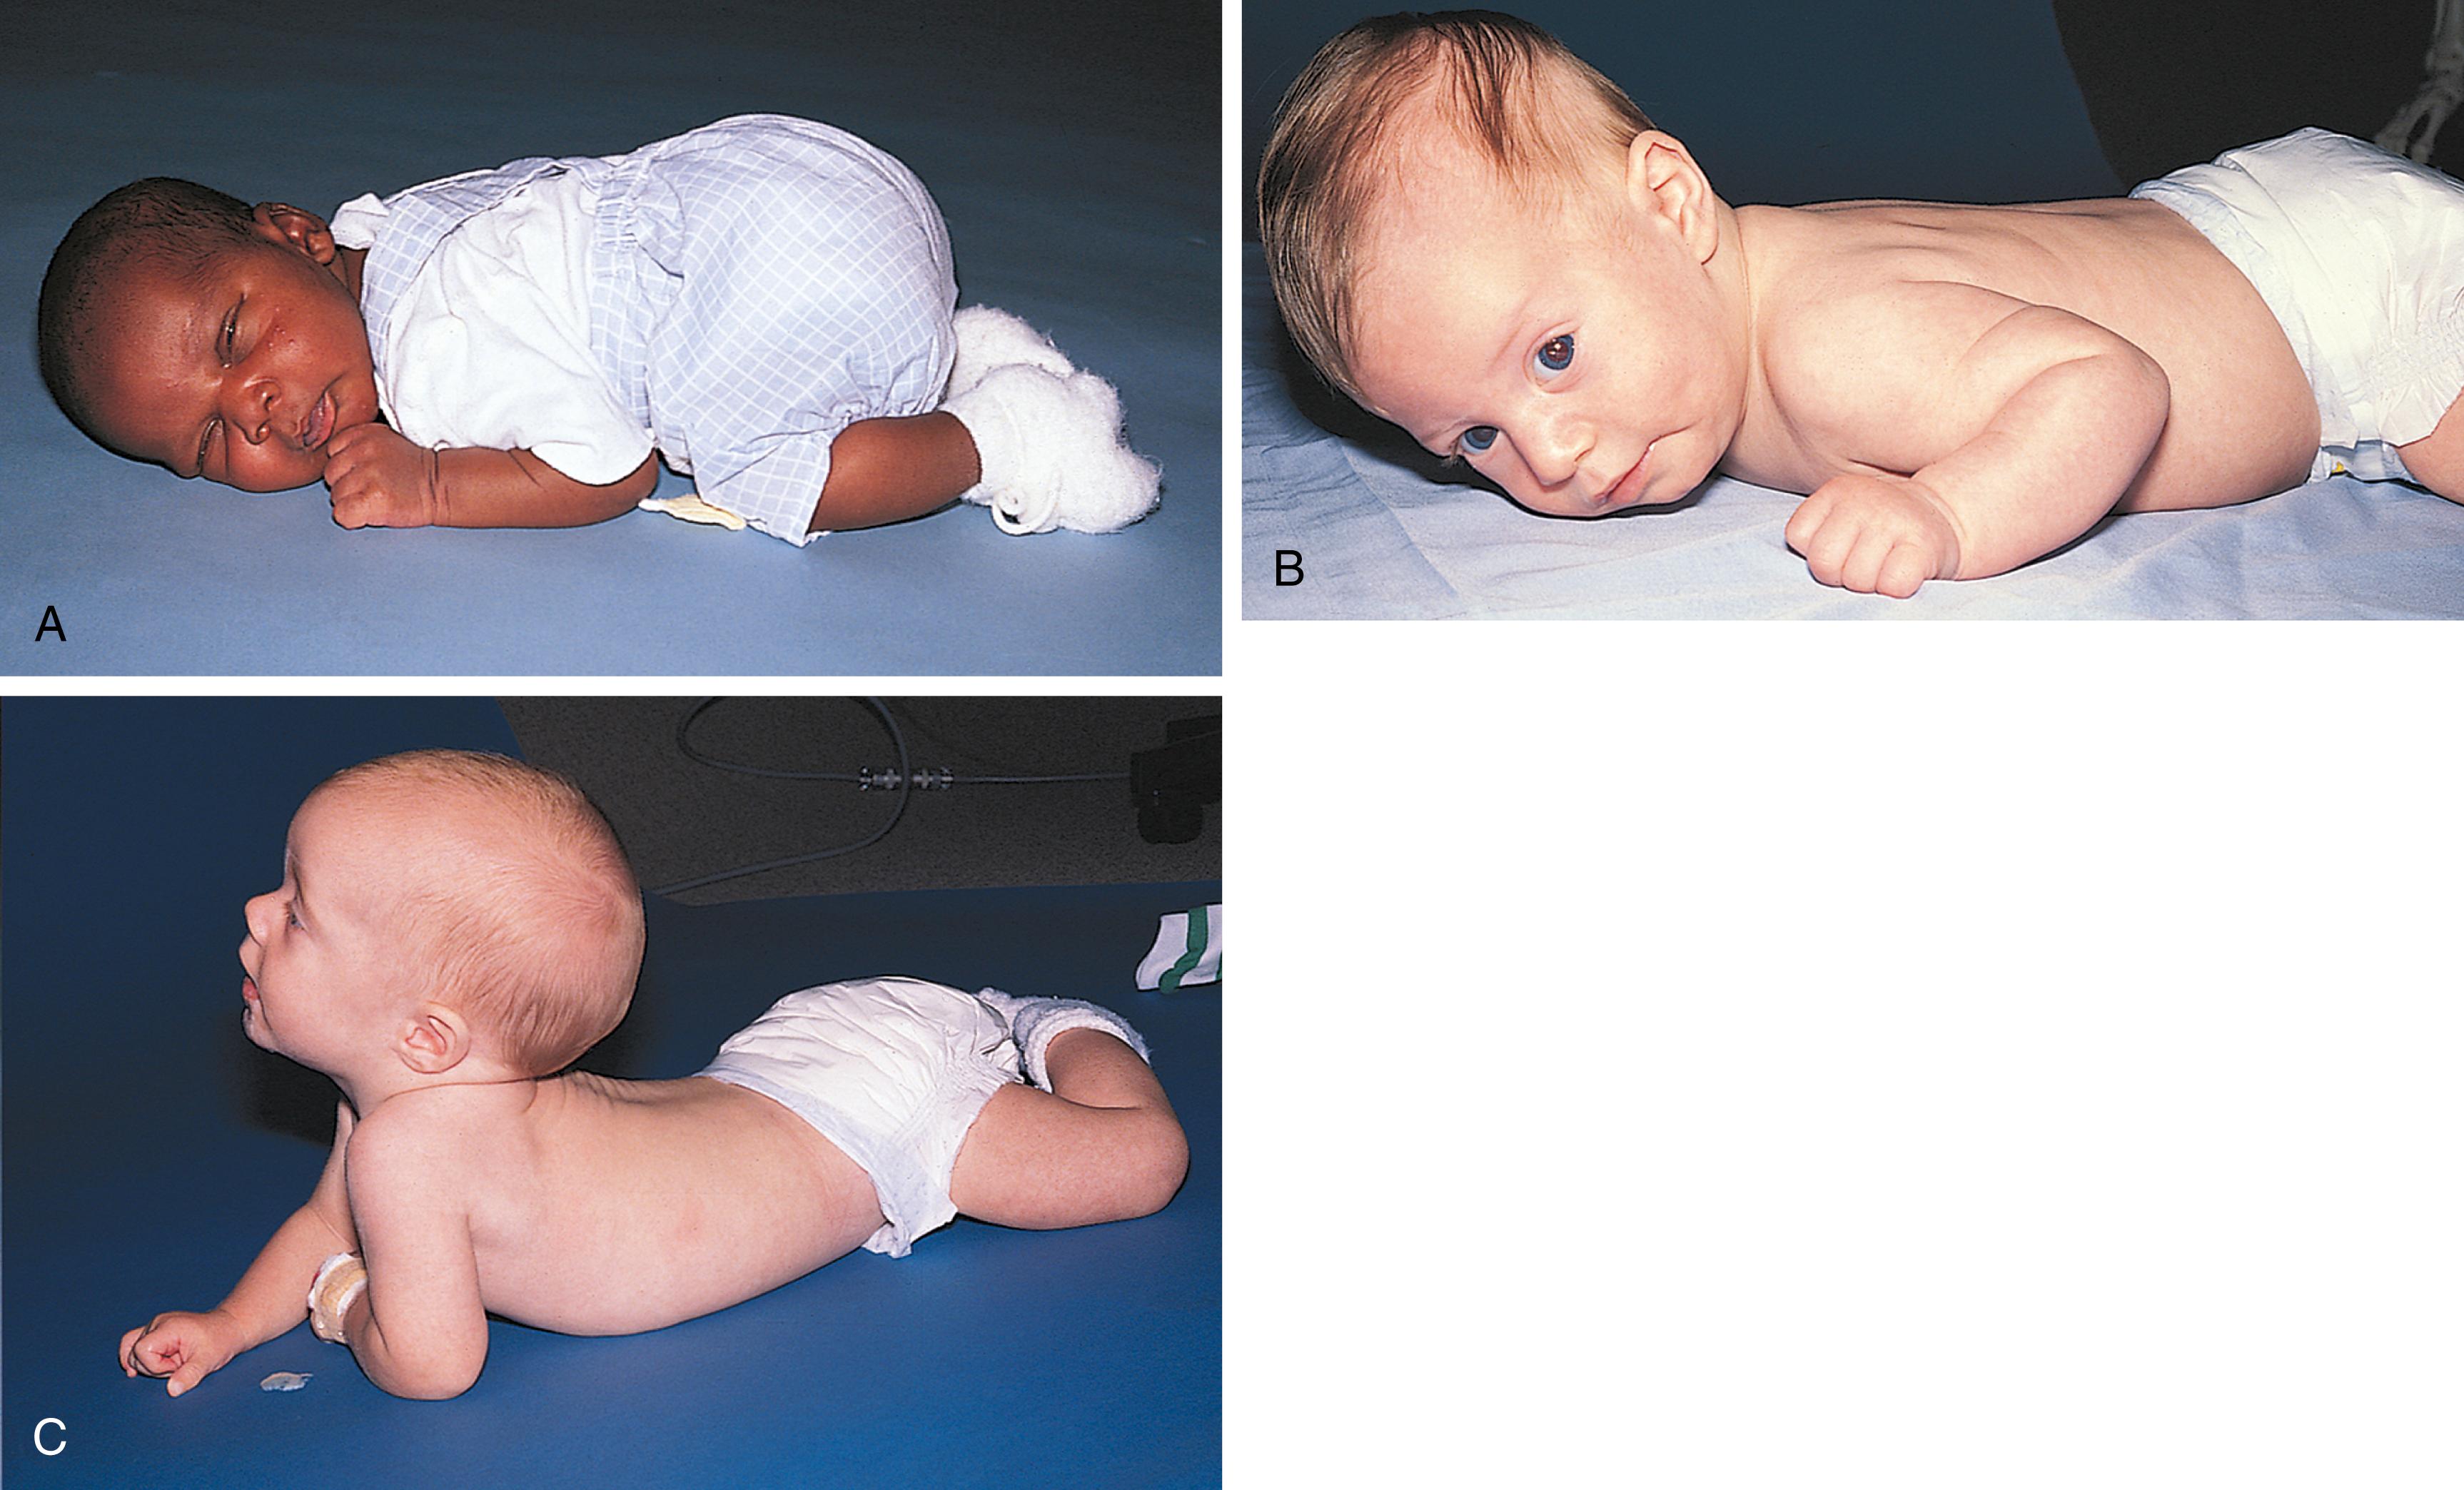 Fig. 3.5, Development of posture in the prone position. (A) The newborn lies tightly flexed with the pelvis high and the knees under the abdomen. (B) At 2 months old, the infant extends the hips and pulls the shoulders up slightly. (C) At 3 to 4 months old, the infant keeps the pelvis flat and lifts the head and shoulders.